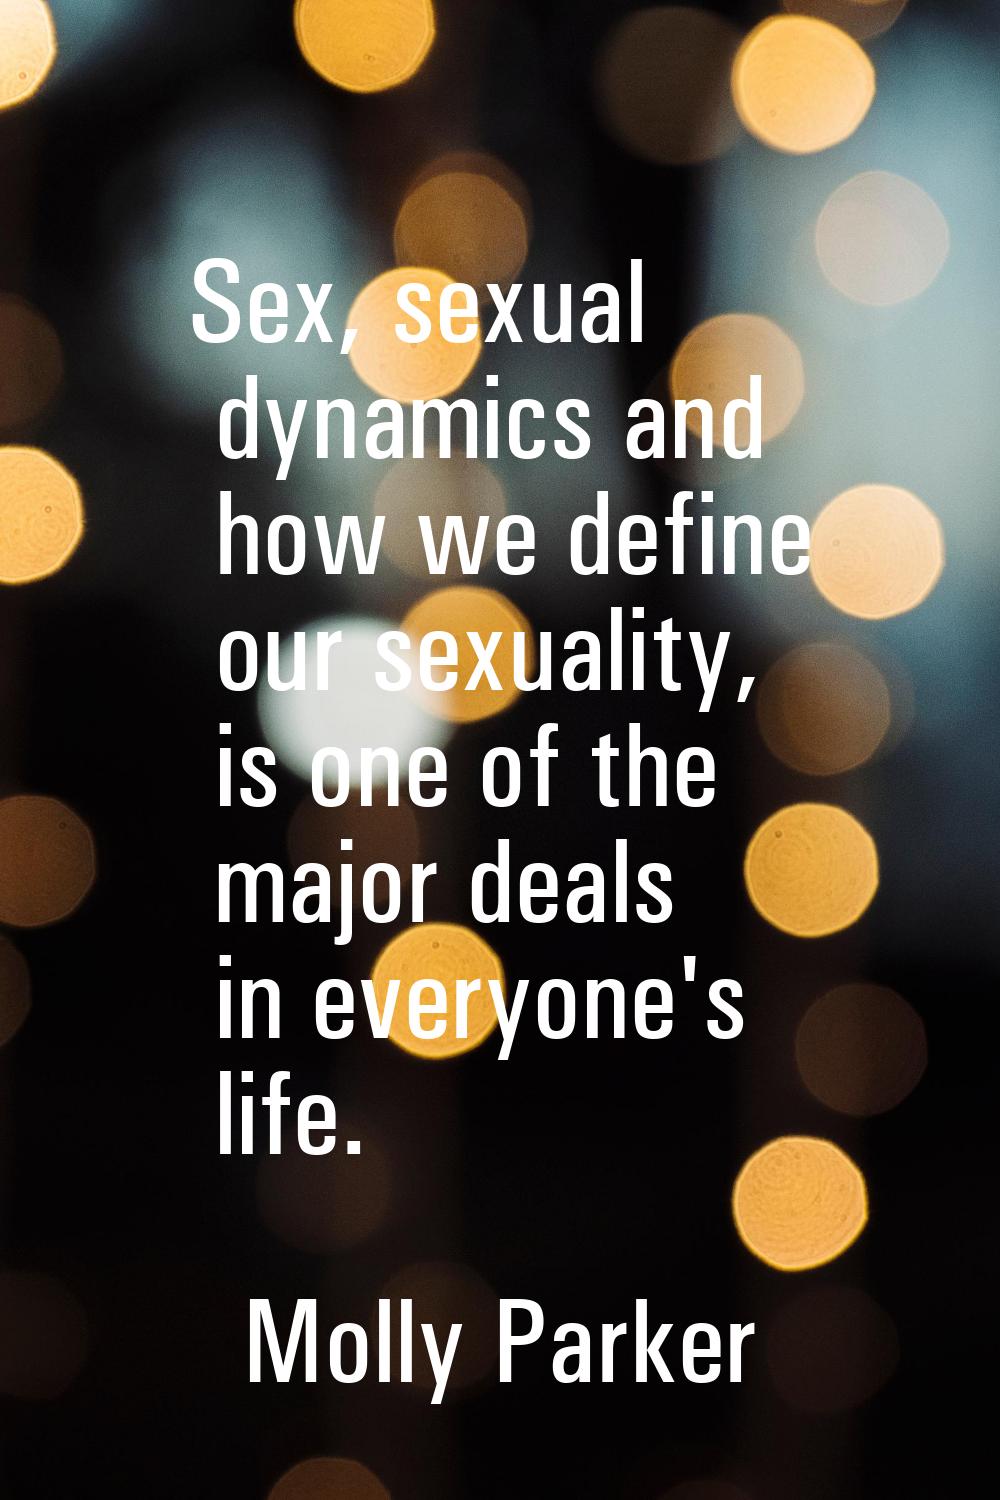 Sex, sexual dynamics and how we define our sexuality, is one of the major deals in everyone's life.